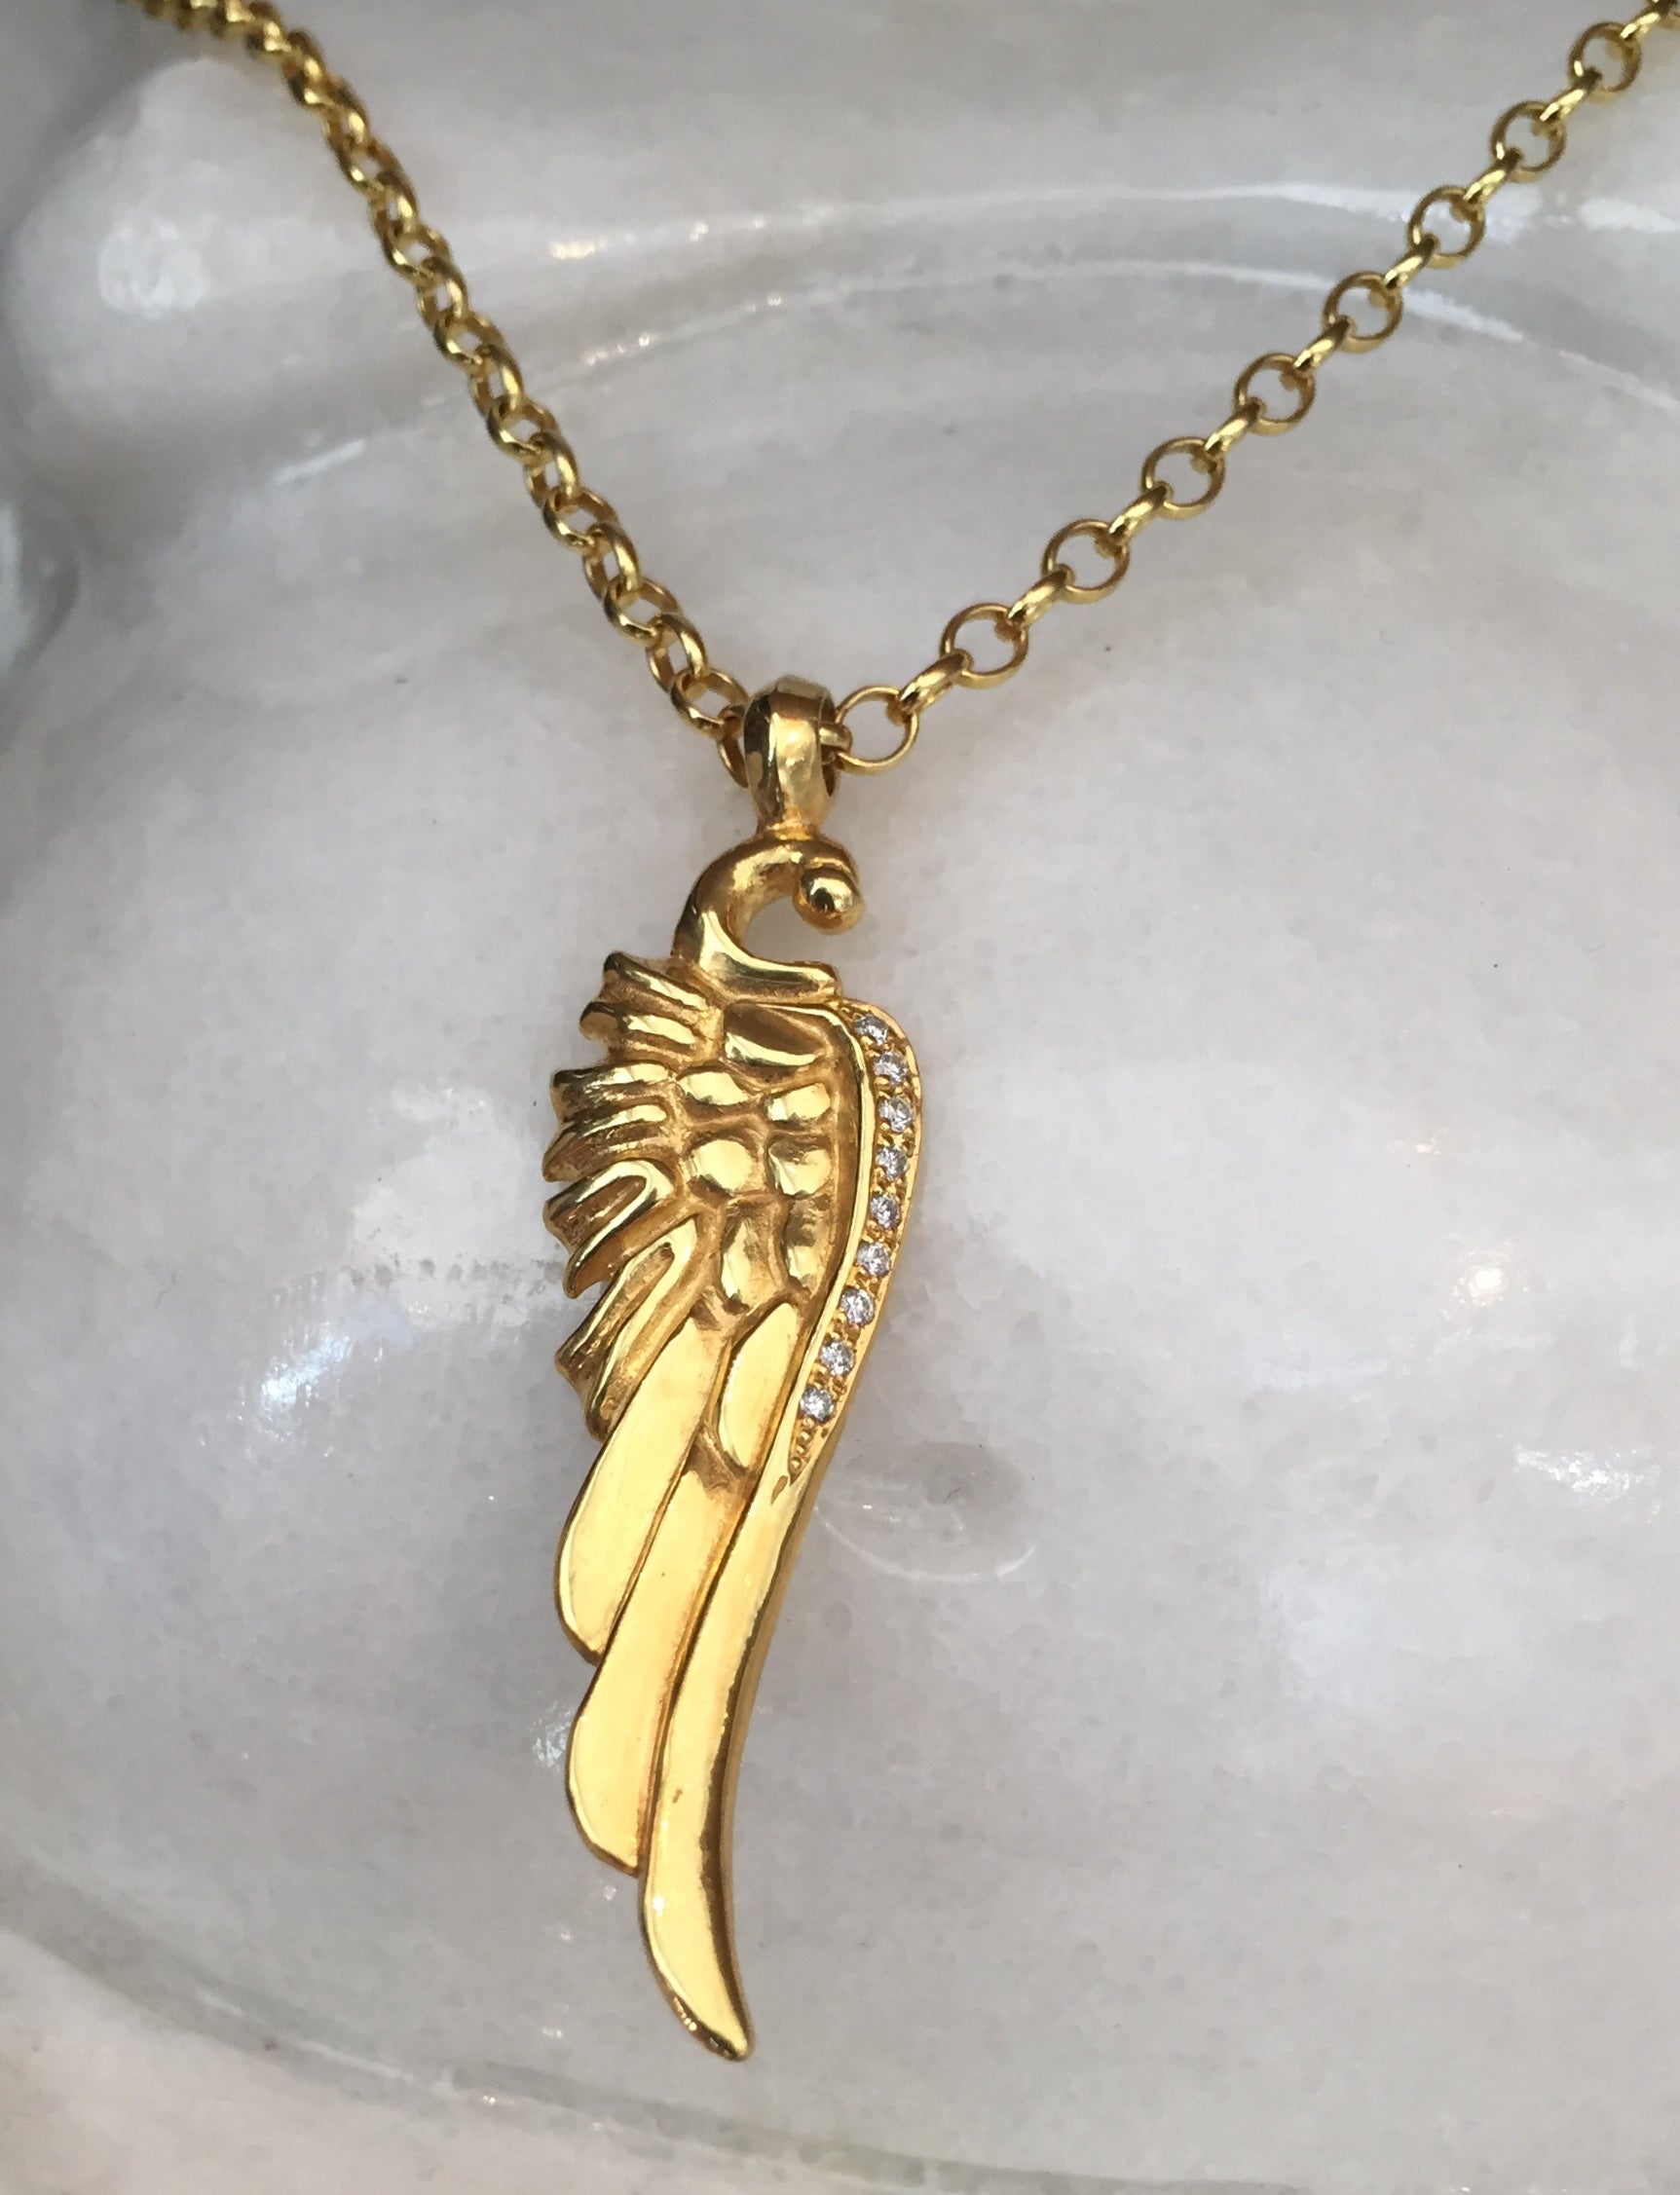 Necklace - Golden Angel Wing with Diamonds by Roman Paul